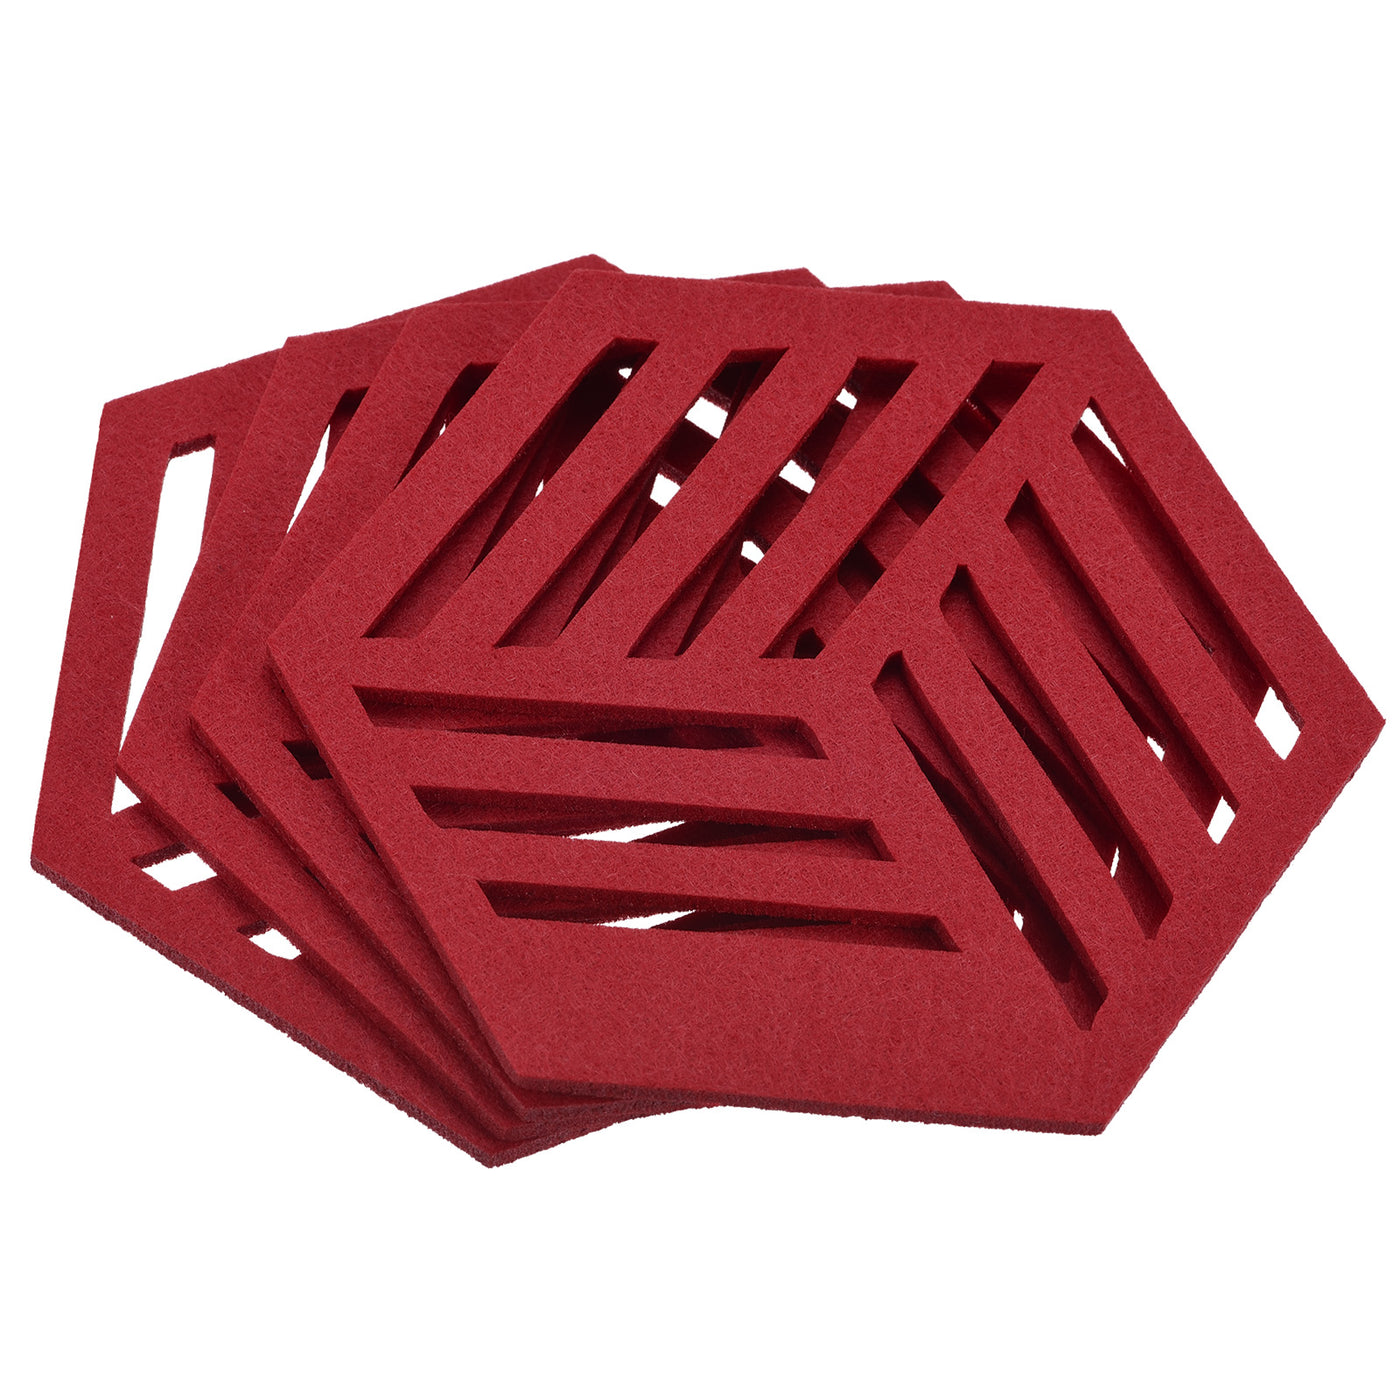 uxcell Uxcell Felt Coasters, 4pcs Hexagon Mat Pad Coaster for Drink Cup Pot Bowl Vase, Red